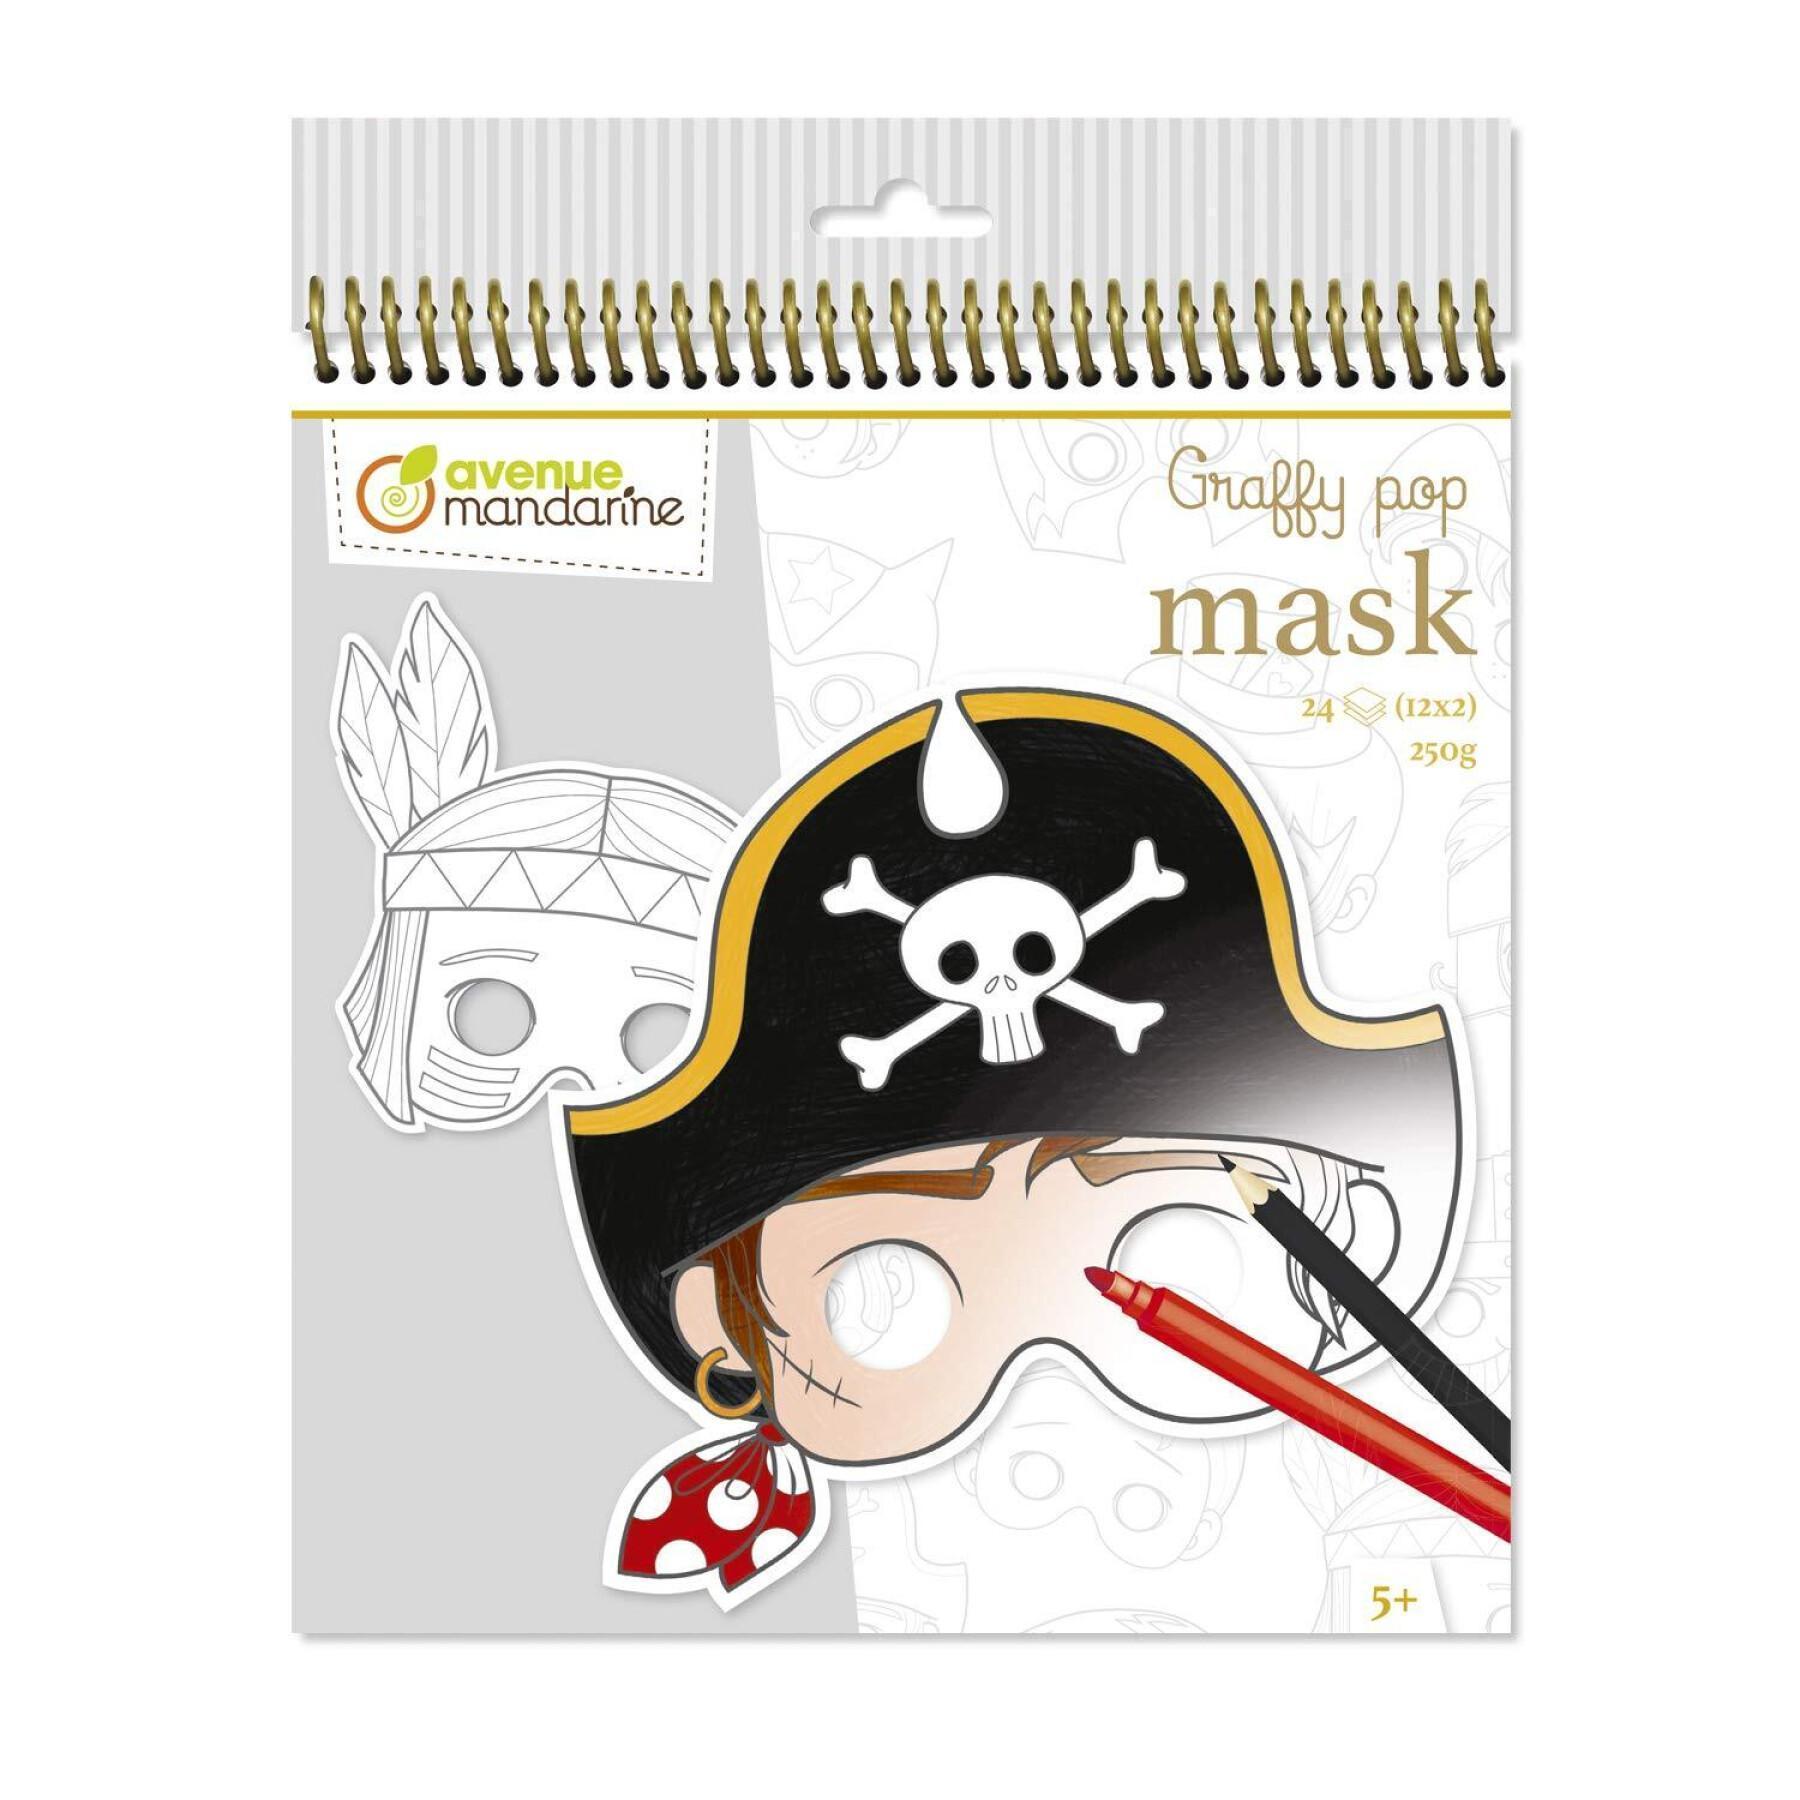 24 sheets of masks to color and cut out for boys Avenue Mandarine Graffy Pop Mask